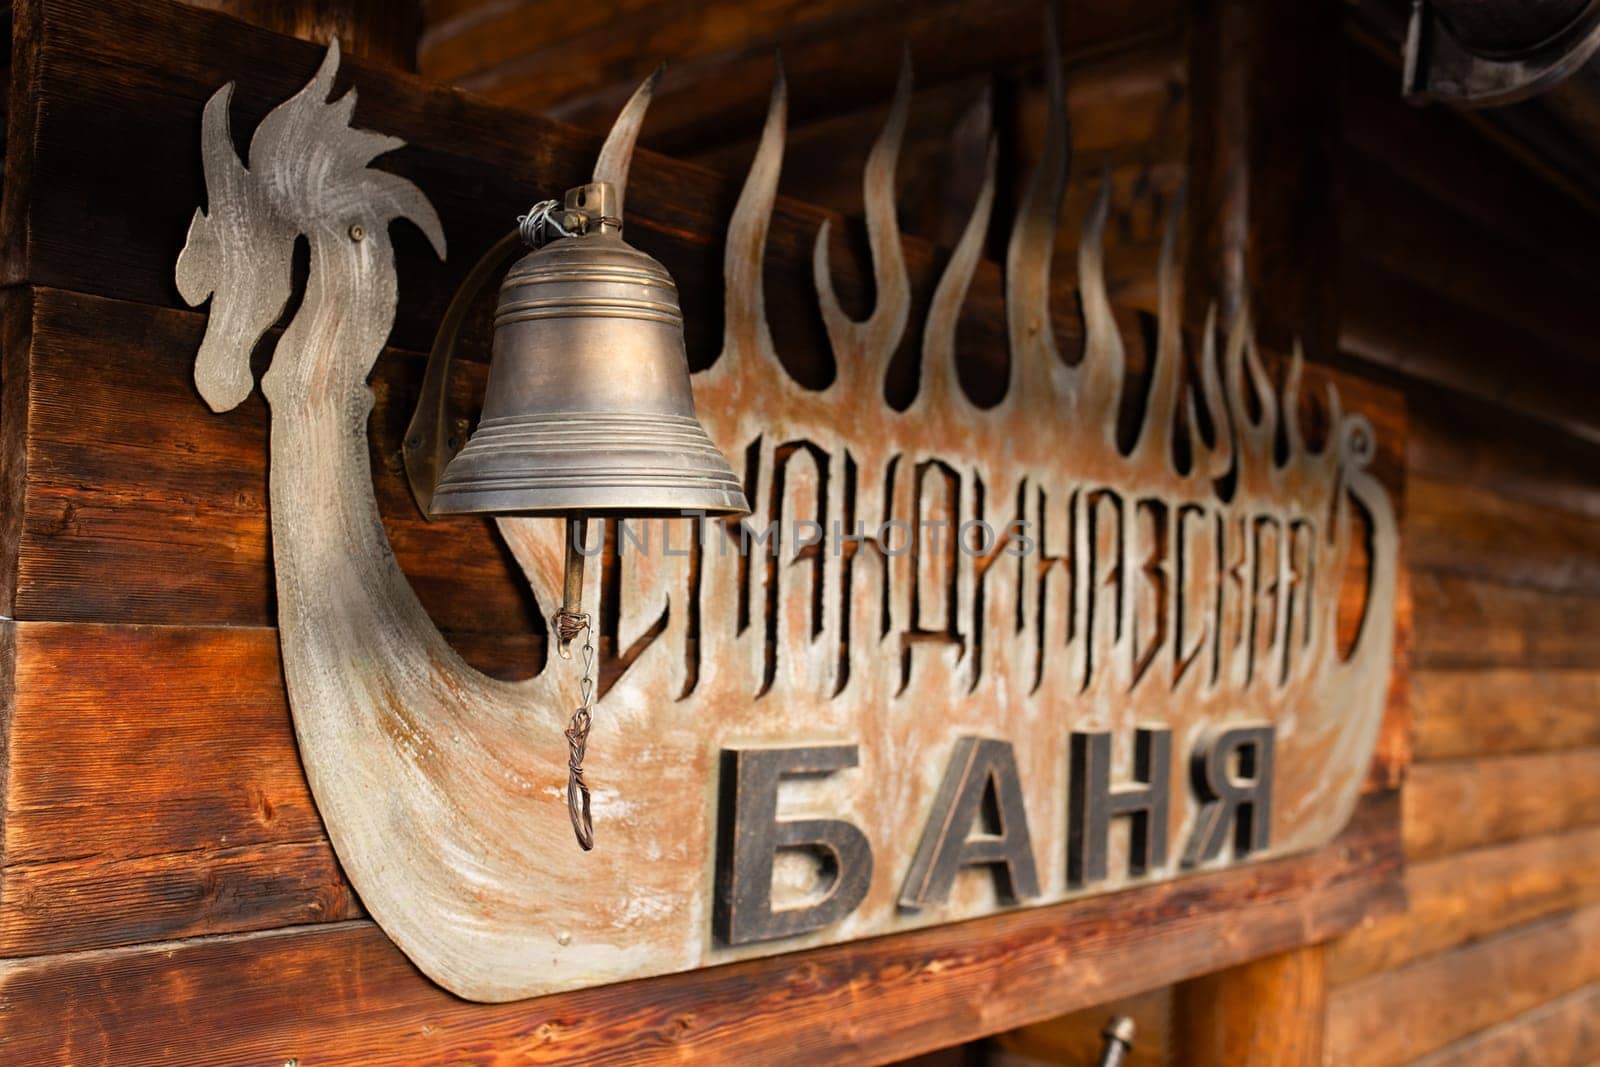 Rustic bell hanging from wooden structure with Banya sign in Cyrillic letters by Pukhovskiy